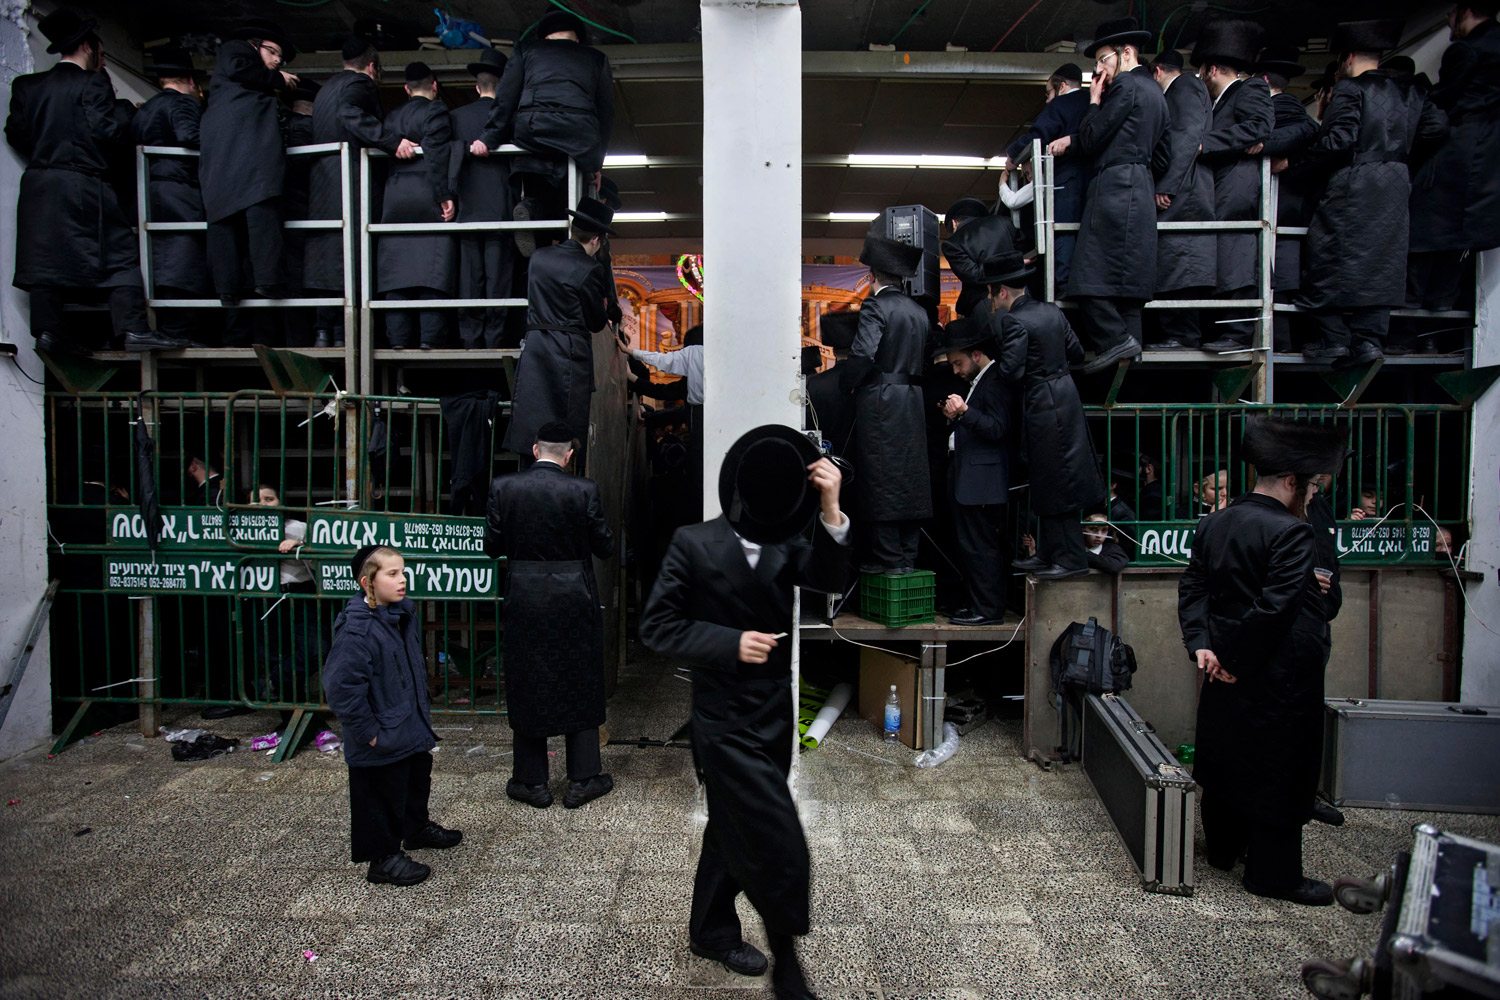 Feb. 16, 2012. Ultra-Orthodox Jewish men crowd together to watch the Sheva Brachot ceremony two days after the traditional Jewish wedding for Chananya Yom Tov Lipa, the great-grandson of the Rabbi of the Wiznitz Hasidic followers, in the ultra-Orthodox town of Bnei Brak near Tel Aviv. The Sheva Brachot in Hebrew, or the seven blessings in English, is a special Jewish wedding blessing.